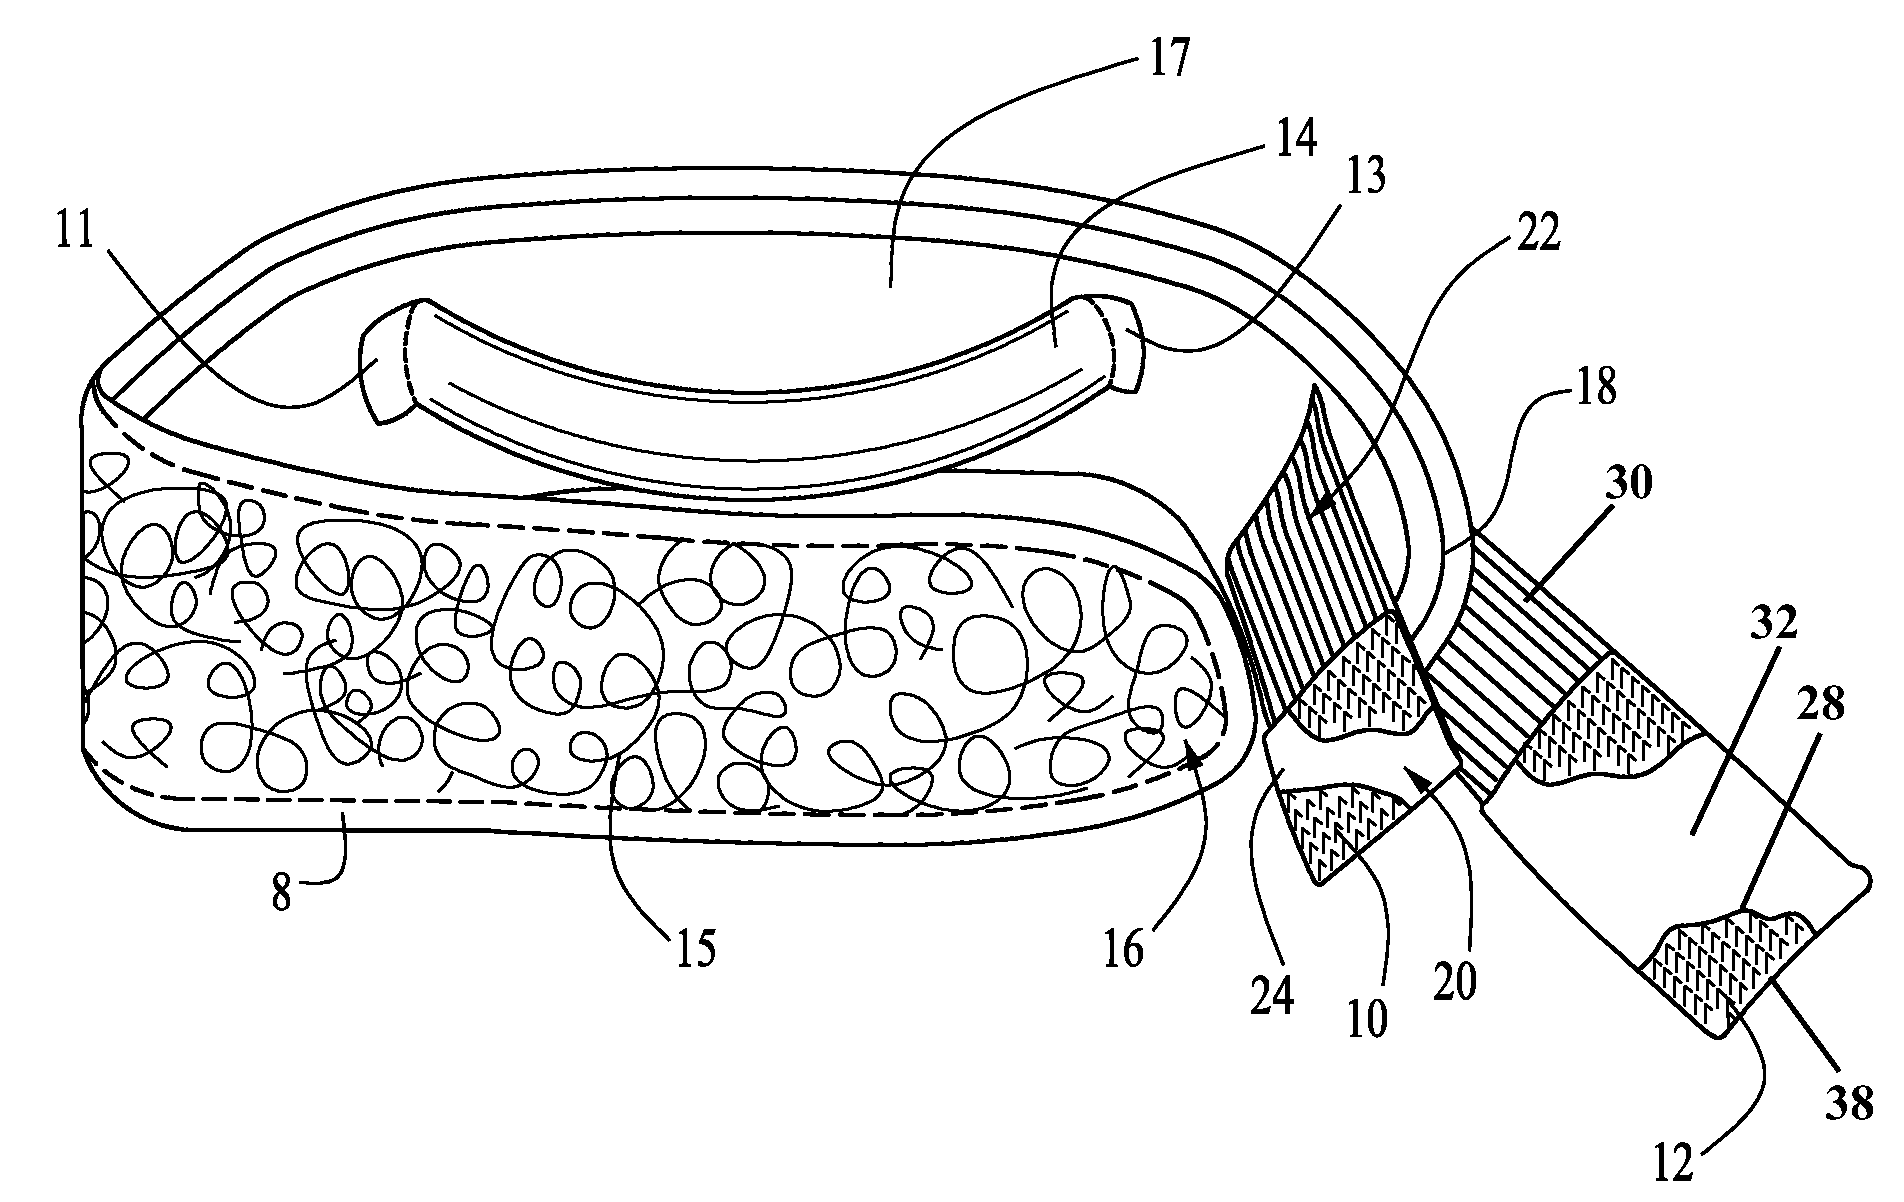 Knee support device